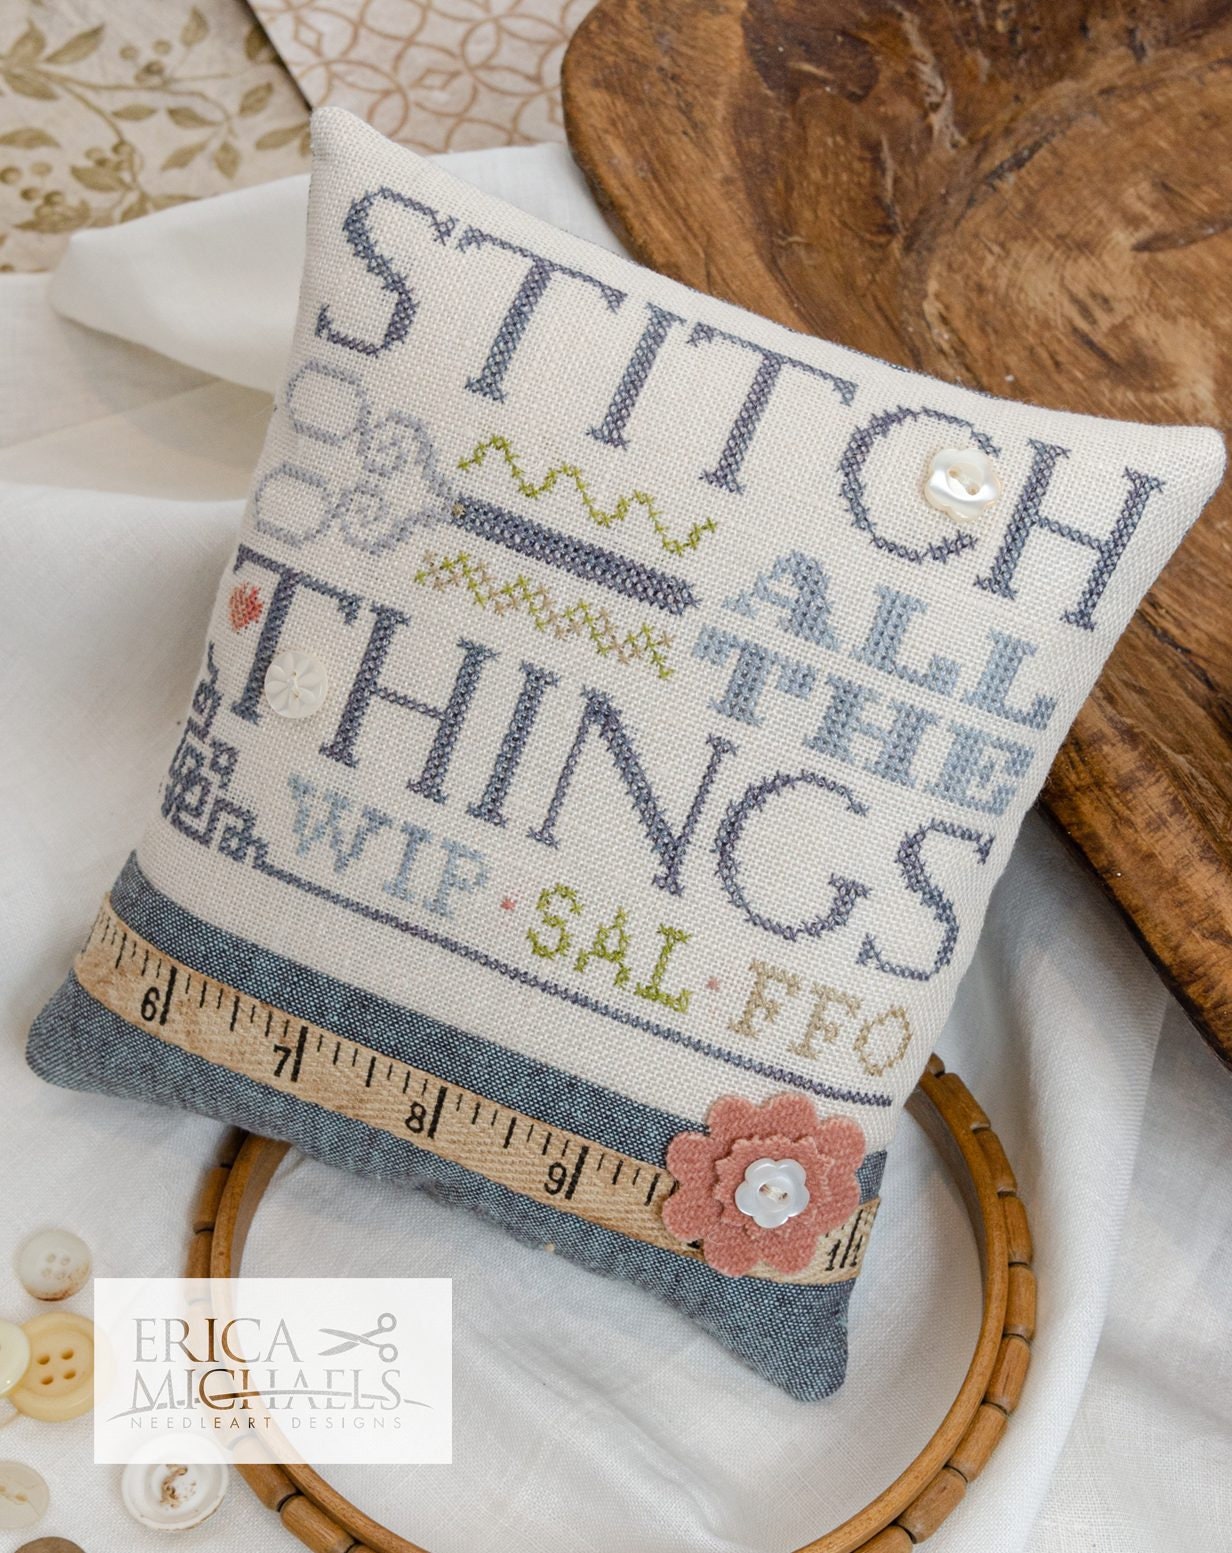 Stitch all the Things - Erica Michaels